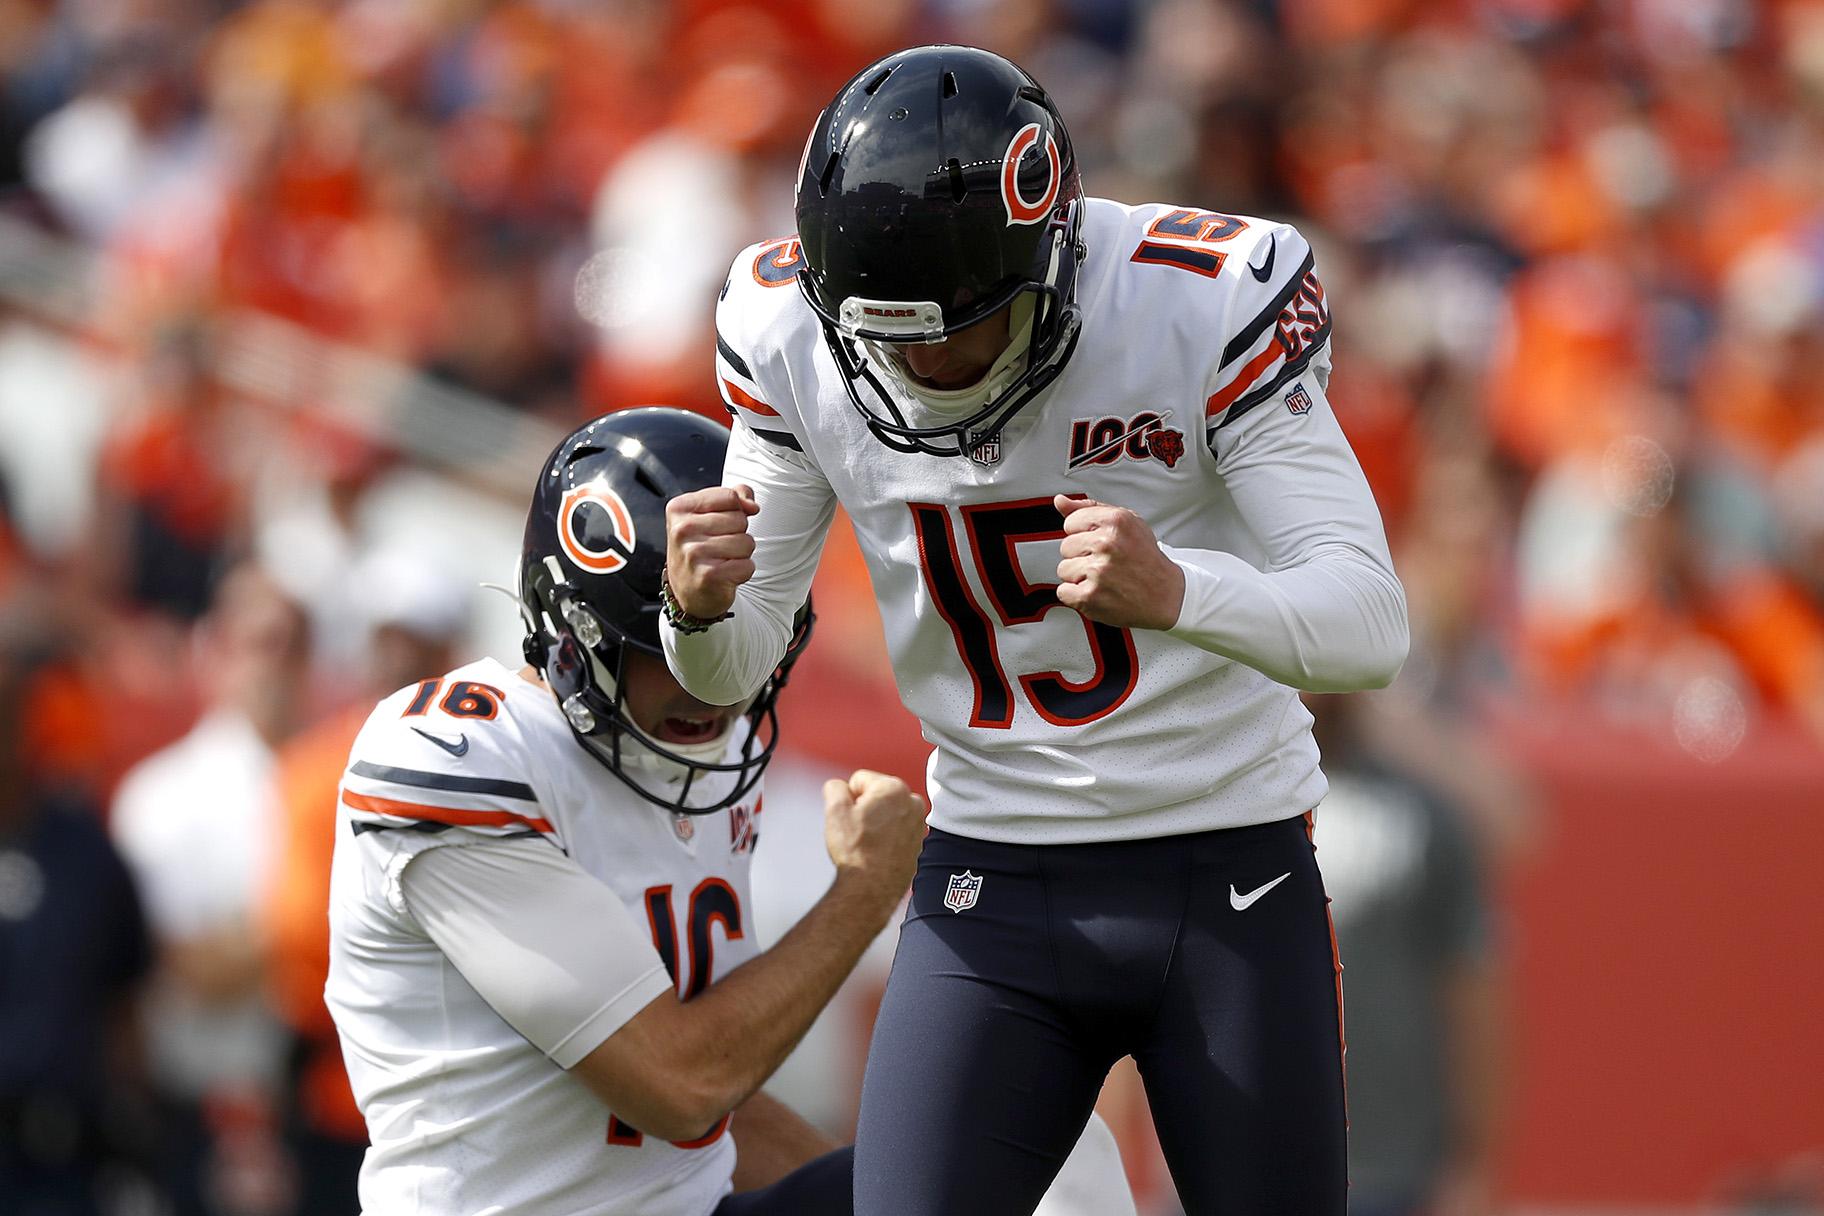 Chicago Bears kicker Eddy Pineiro (15) celebrates his field goal with punter Pat O’Donnell (16) during the first half of an NFL football game against the Denver Broncos, Sunday, Sept. 15, 2019, in Denver. (AP Photo / David Zalubowski)